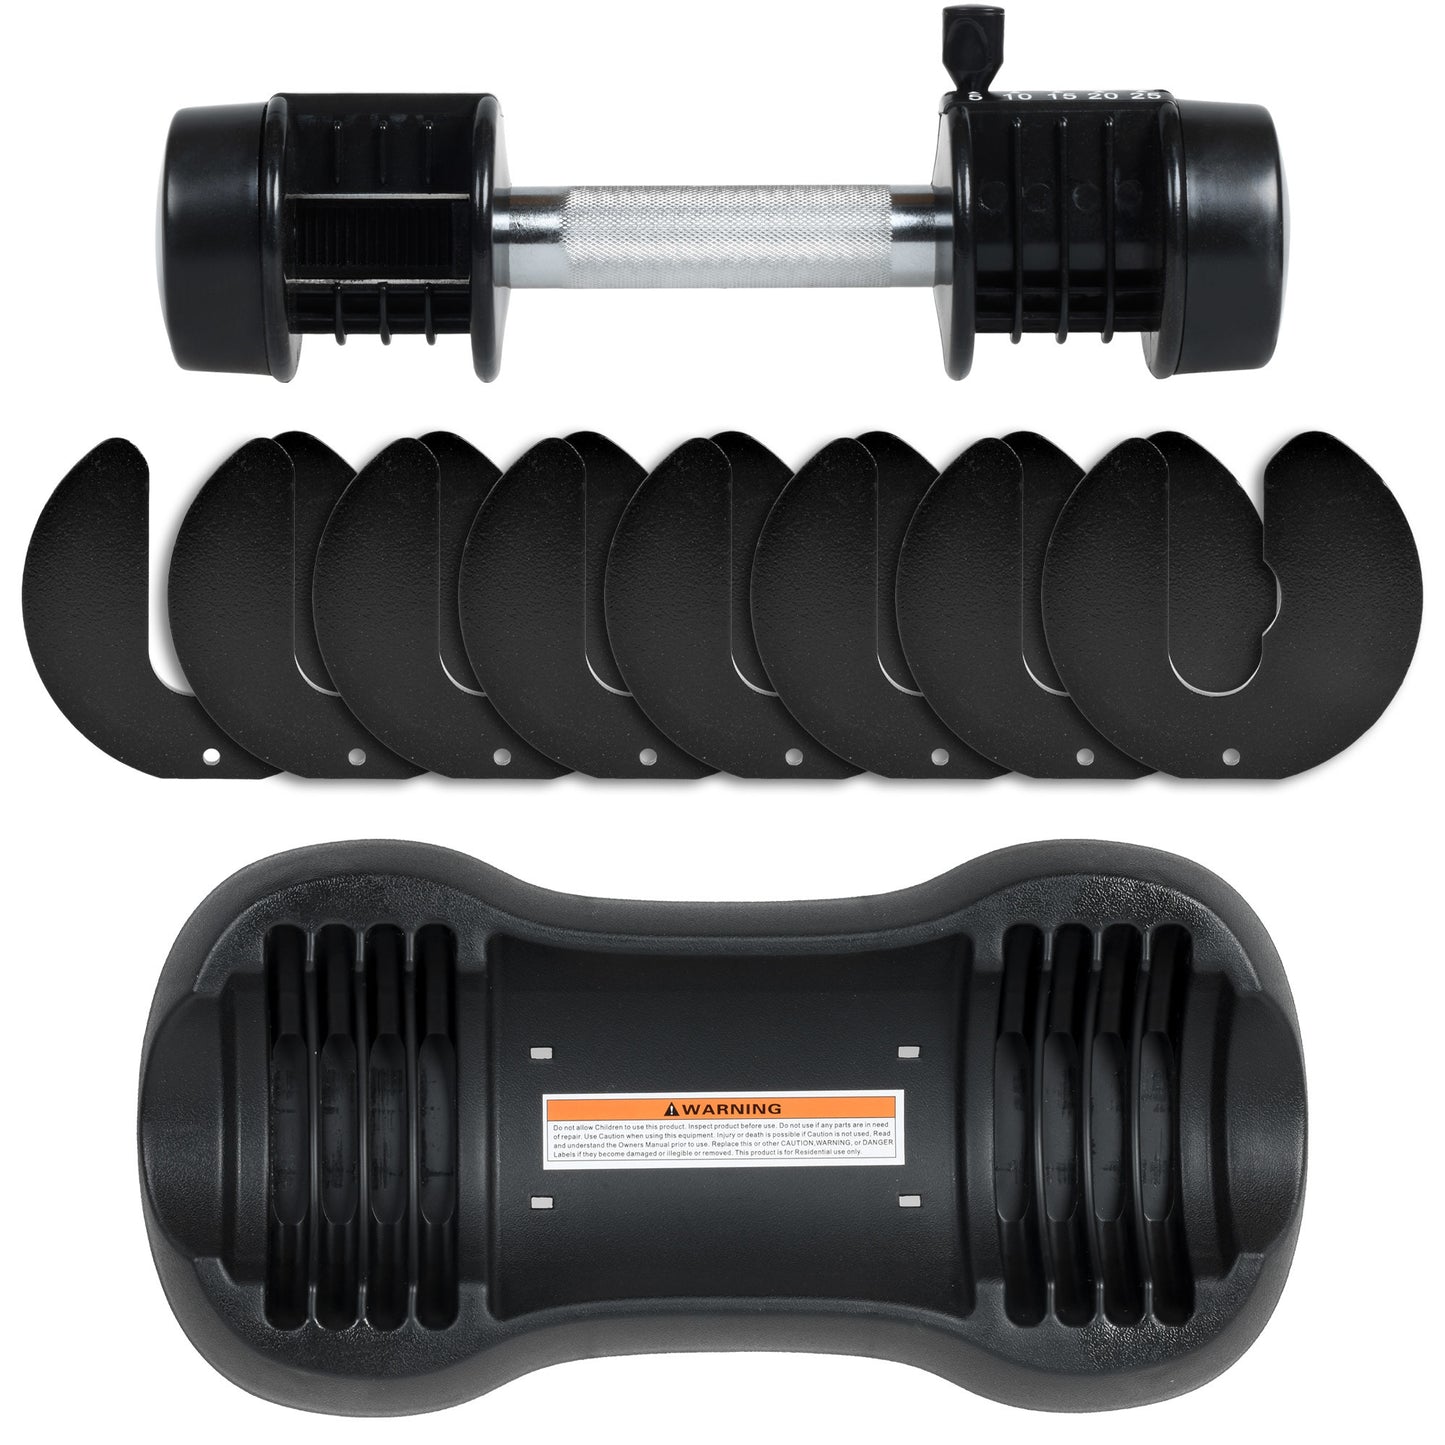 Pair of 12.5 Lbs Adjustable Dumbbell with Handle and Weight Plate for Home Gym black RT